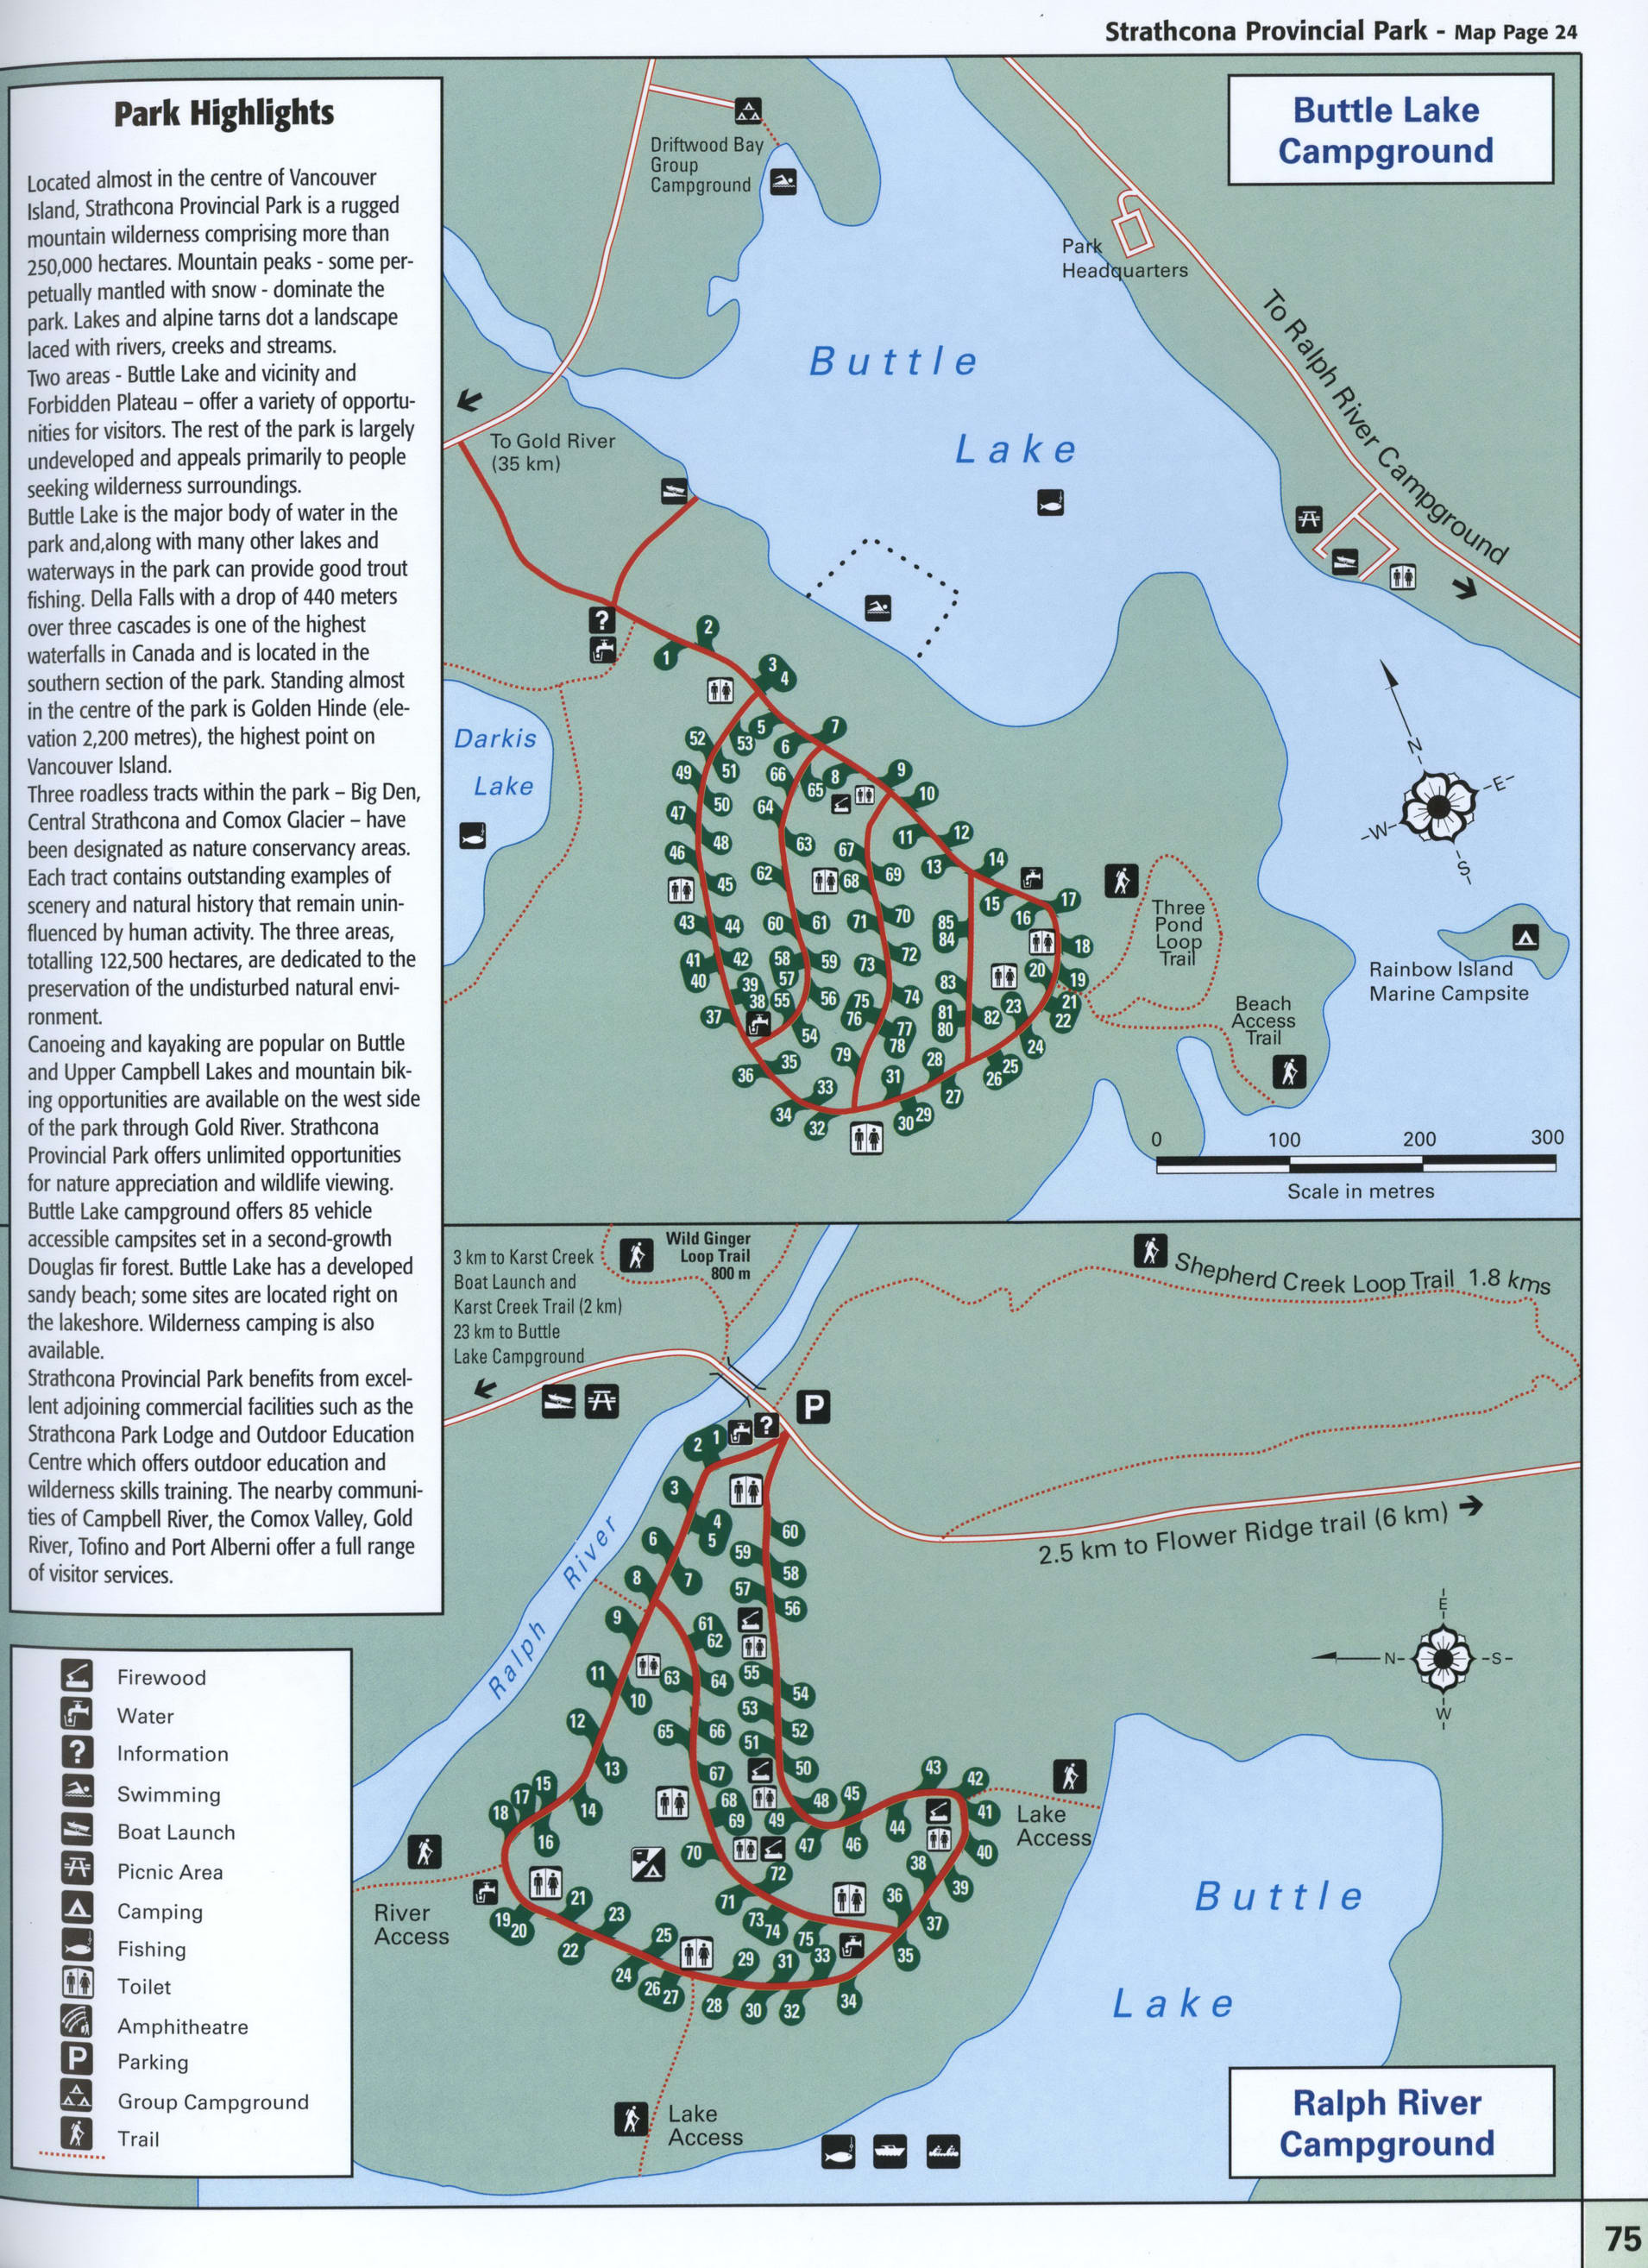 Strathcona Provincial Park map with Park Highlights